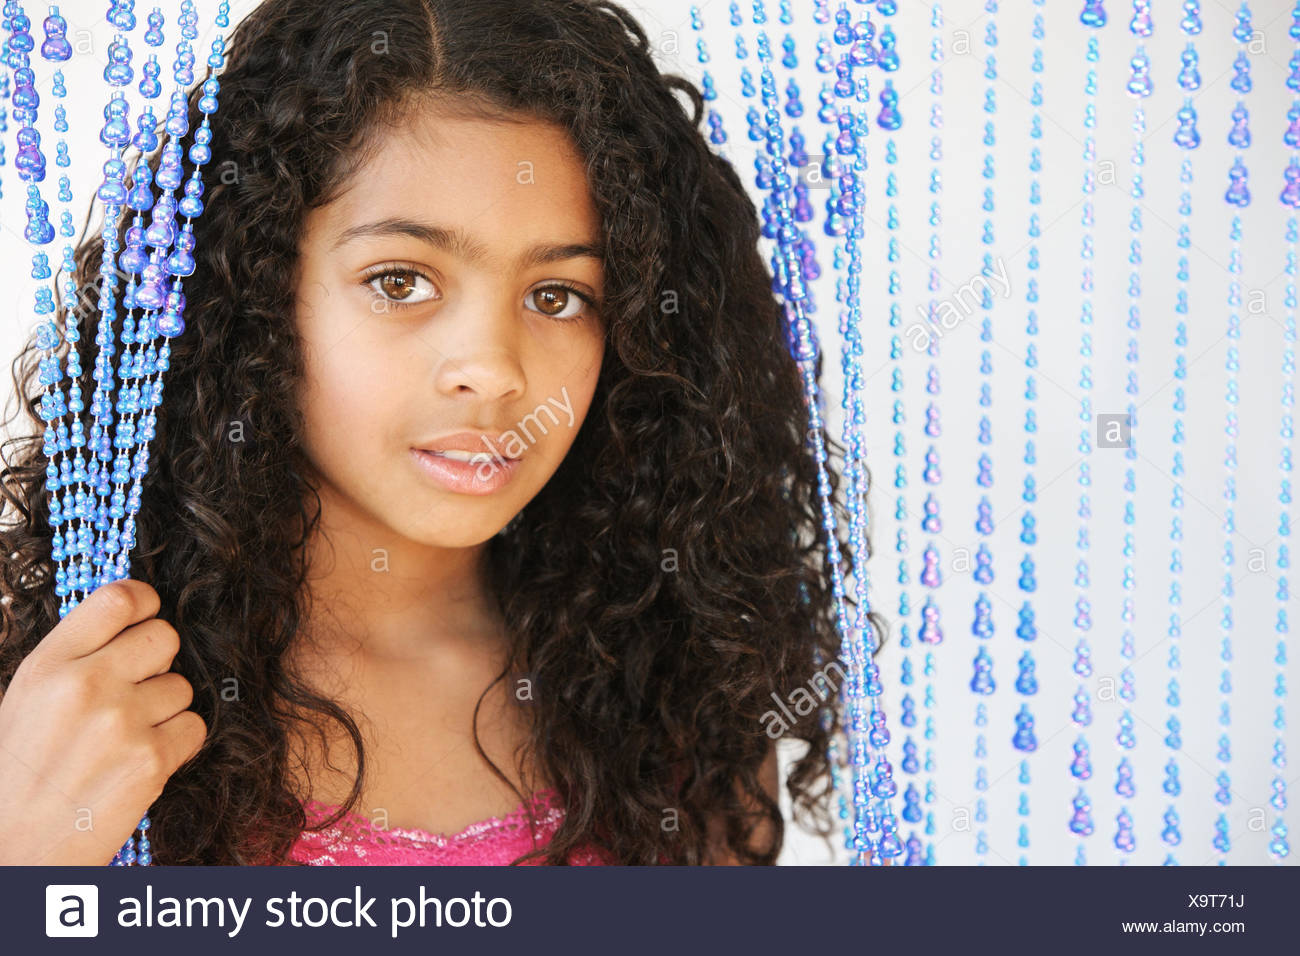 Portrait Of A Young Girl With Dark Curly Hair And Brown